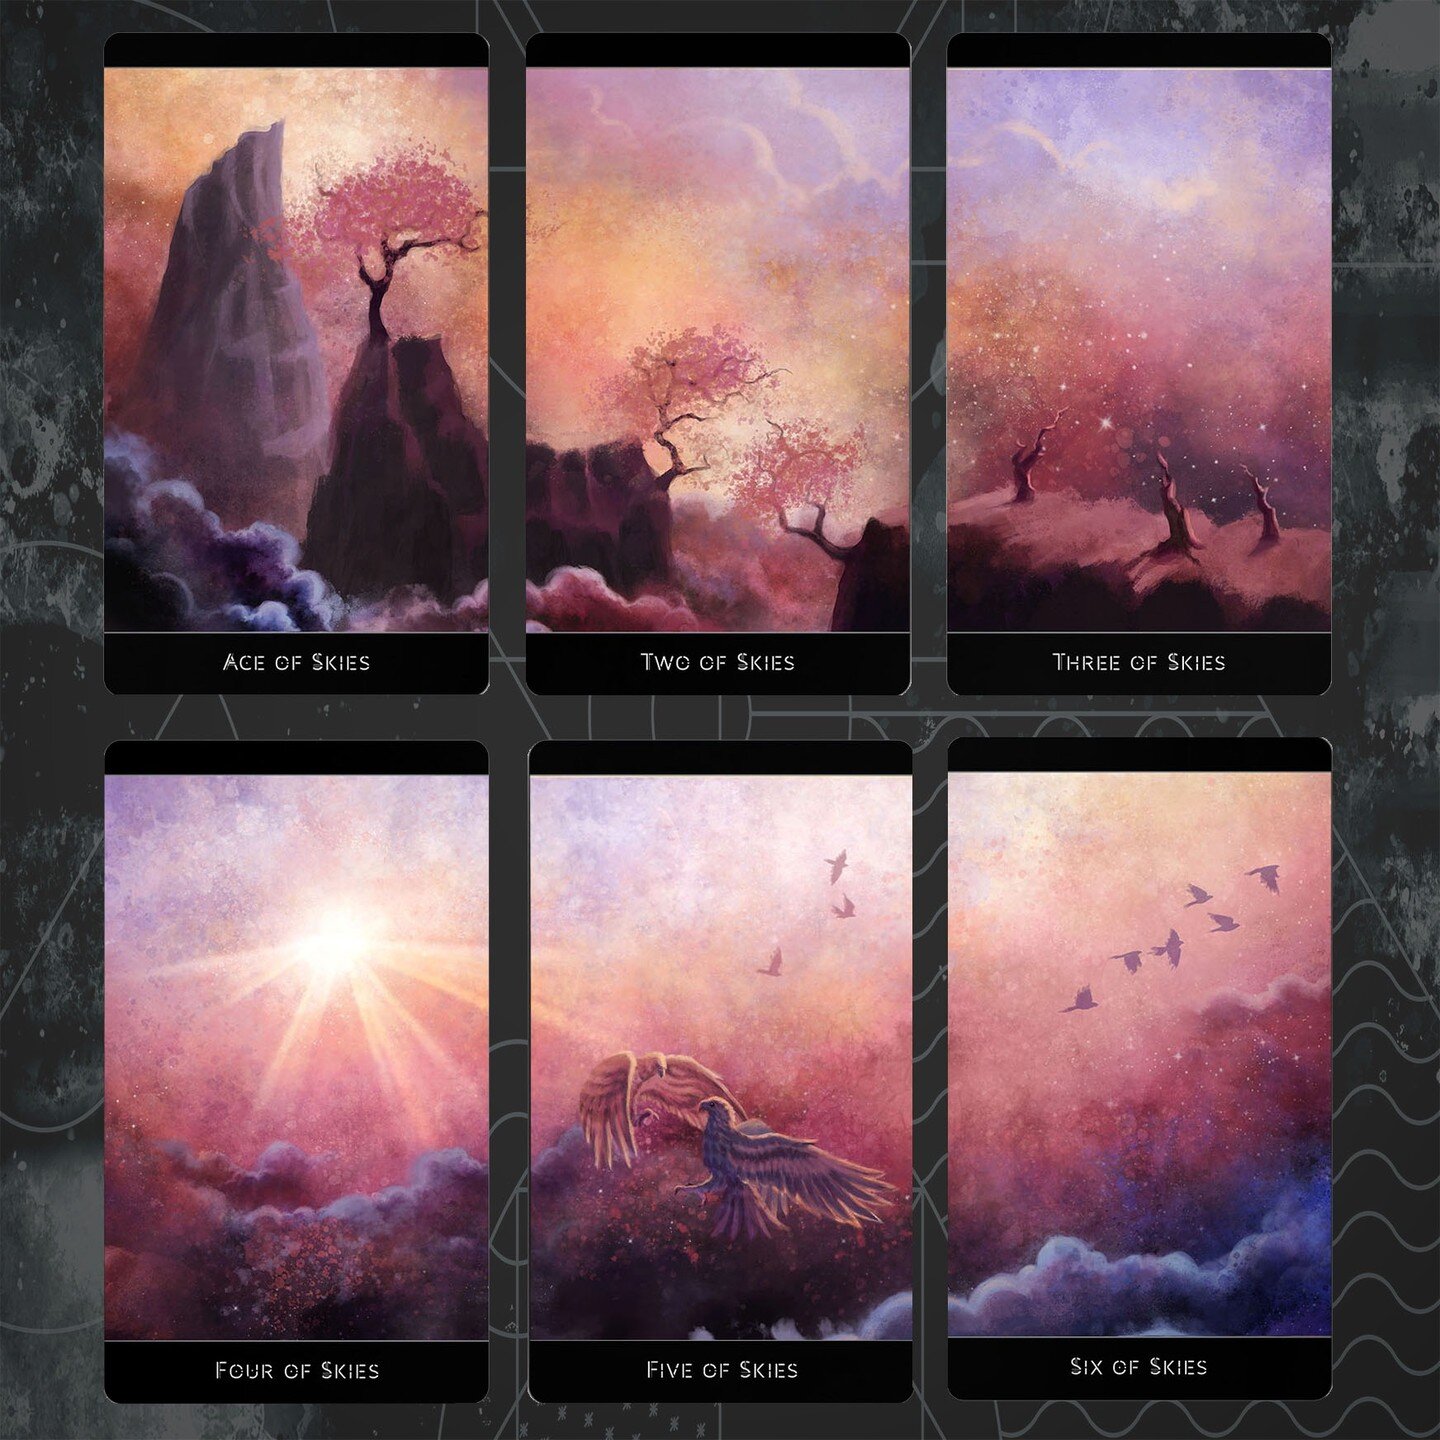 And the Skies suit, which got some minor conceptual tweaks and new sunset inspired color palette.. #thelostforesttarot #lostforesttarot #indietarot #indietarotdeck #tarotkickstarter #kickstartertarot #tarot #tarotreader #fantasyart #fantasyillustrati